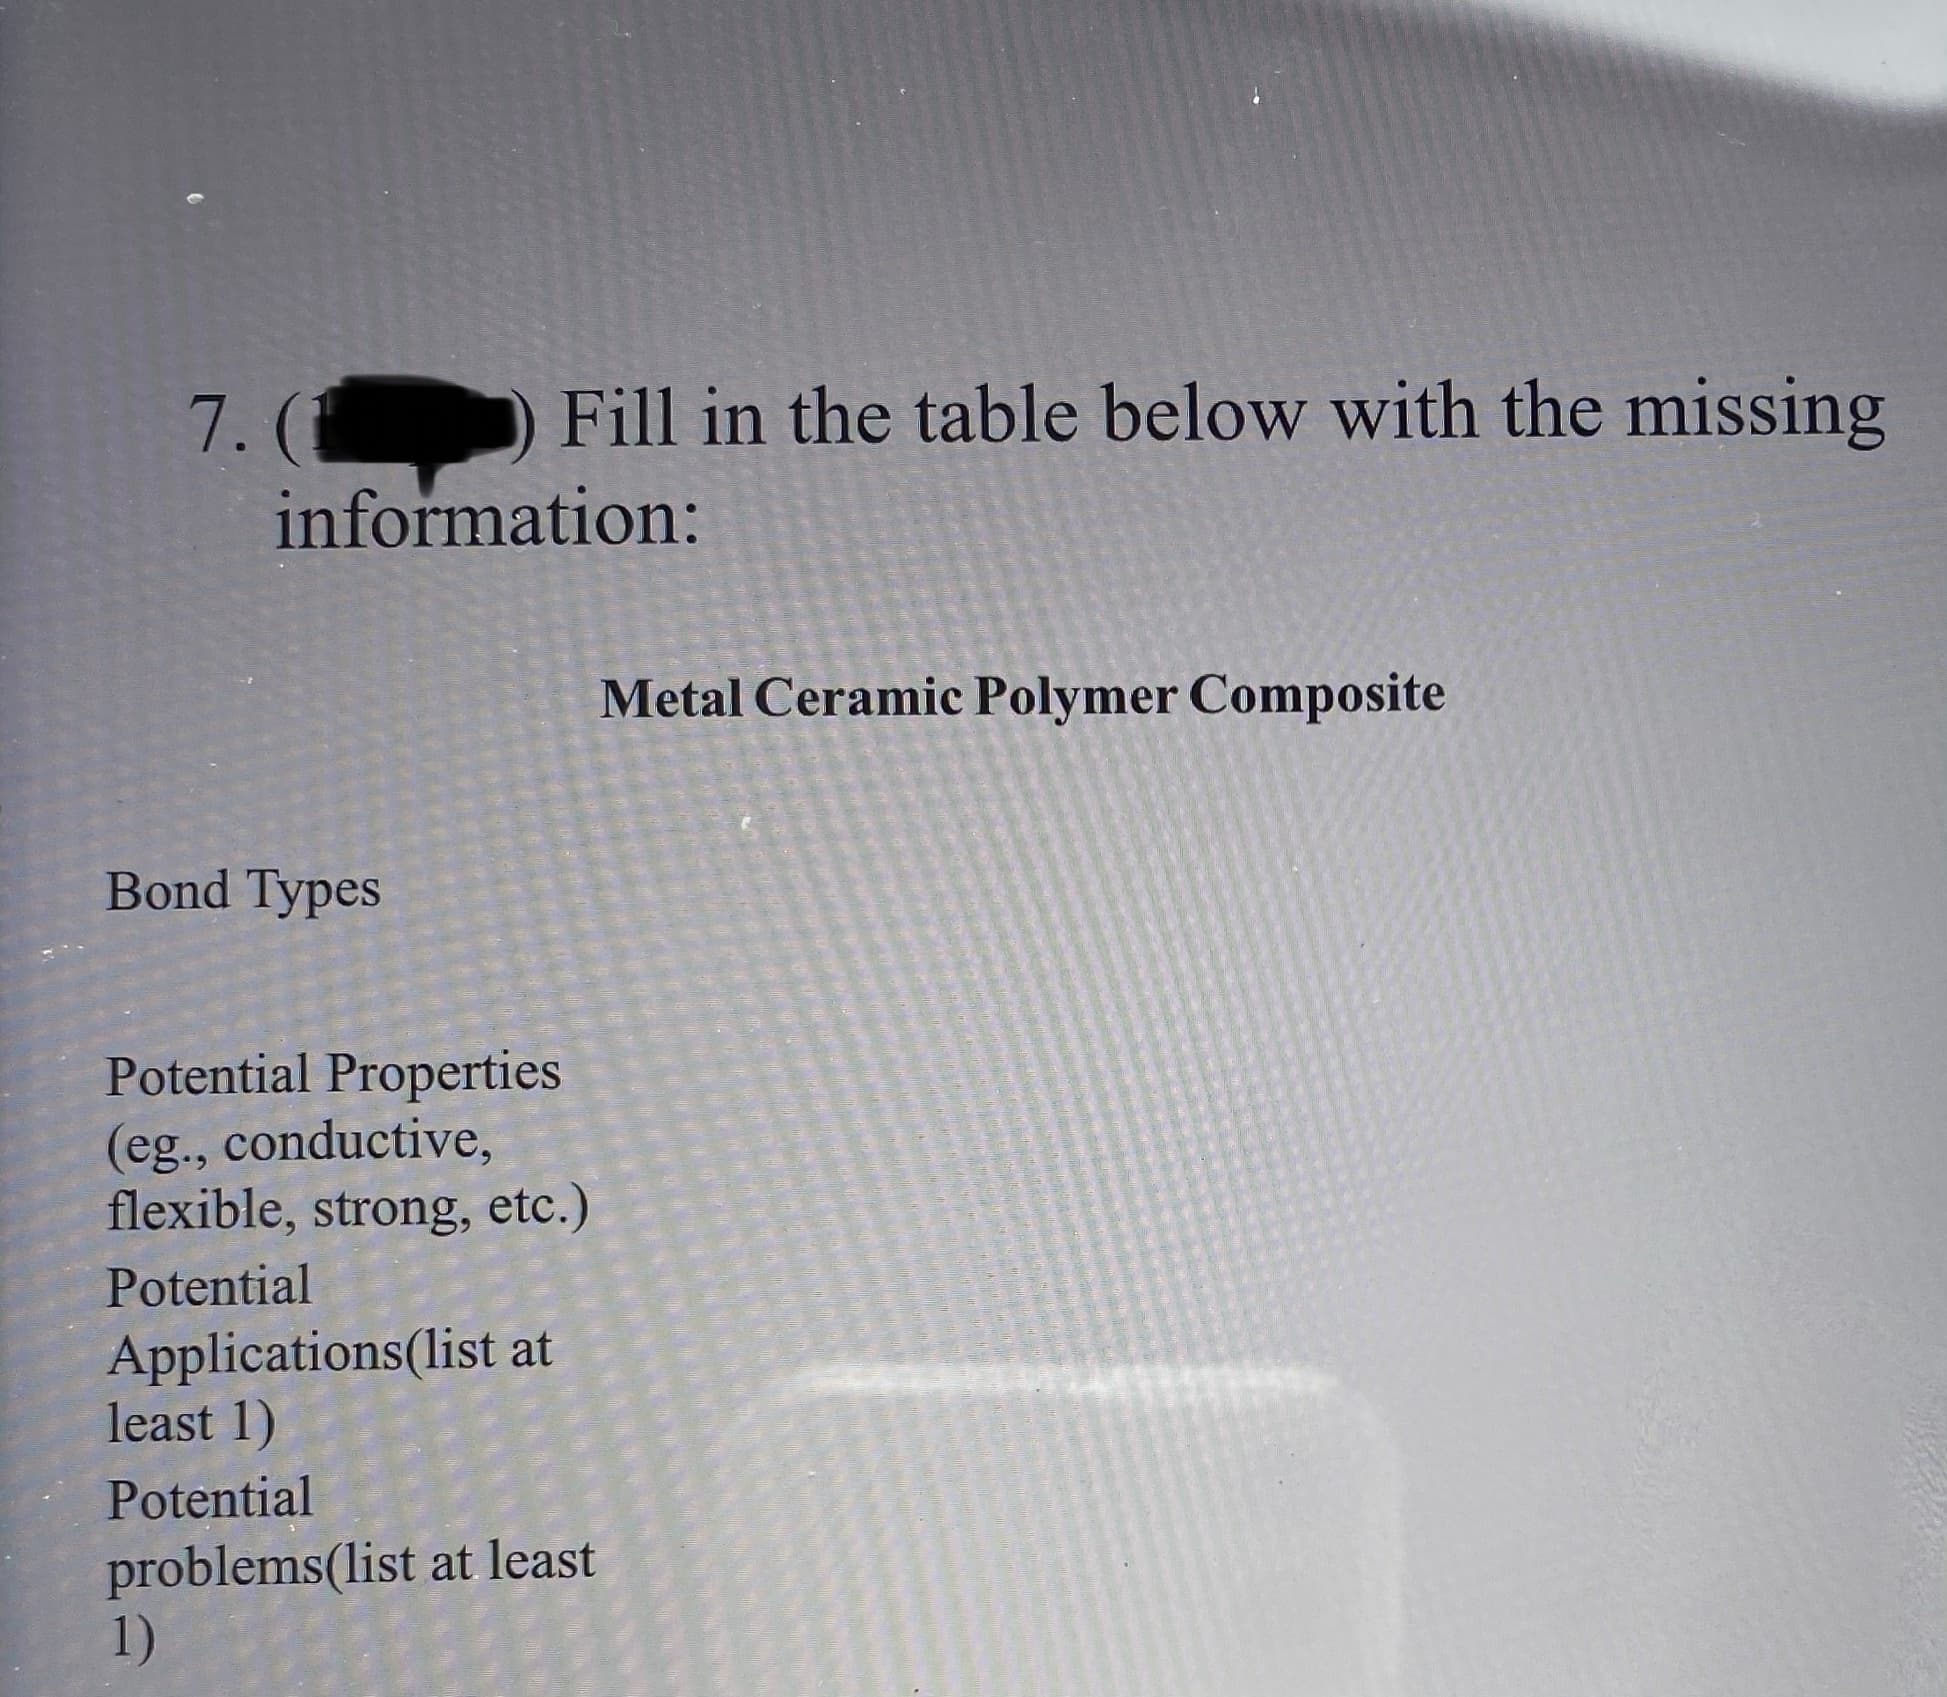 Fill in the table below with the missing
7. (
information:
Metal Ceramic Polymer Composite
